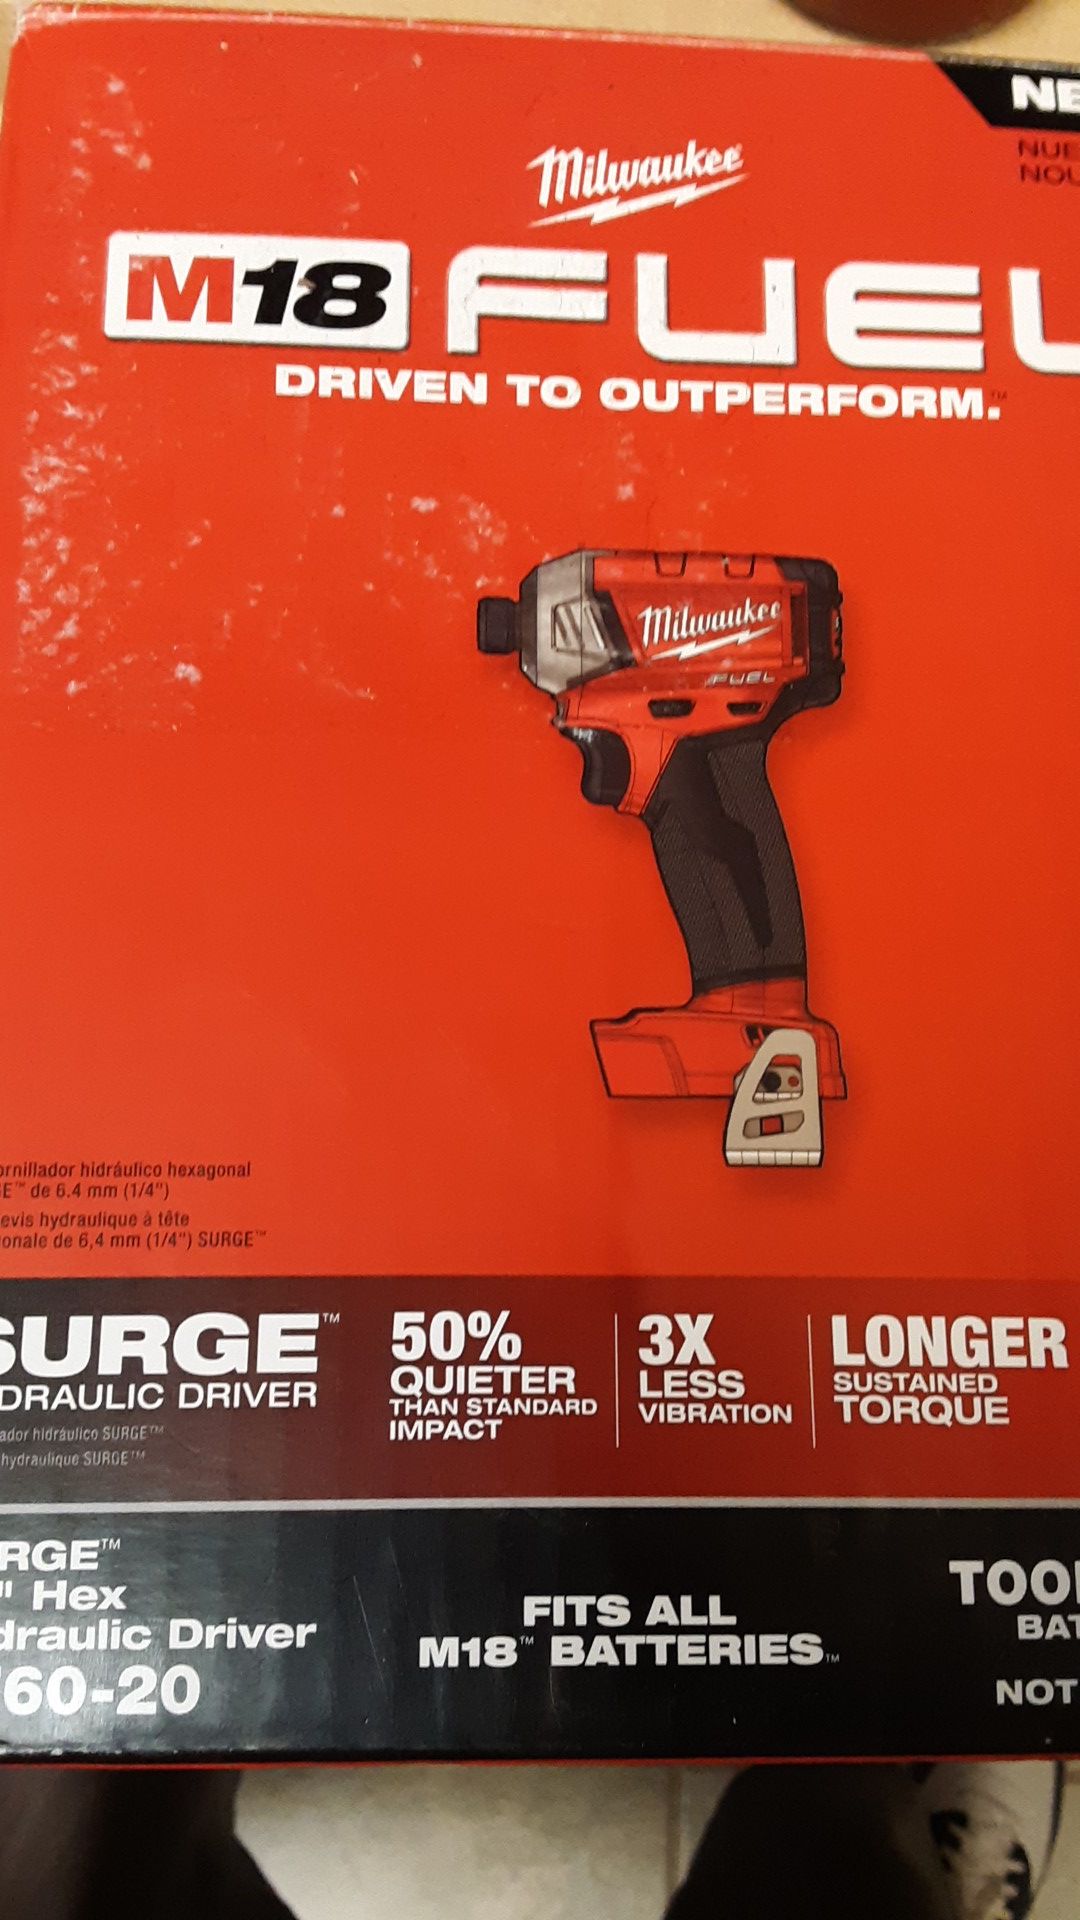 Milwaukee M18 fuel surge 1/4 in HEX hydraulic driver